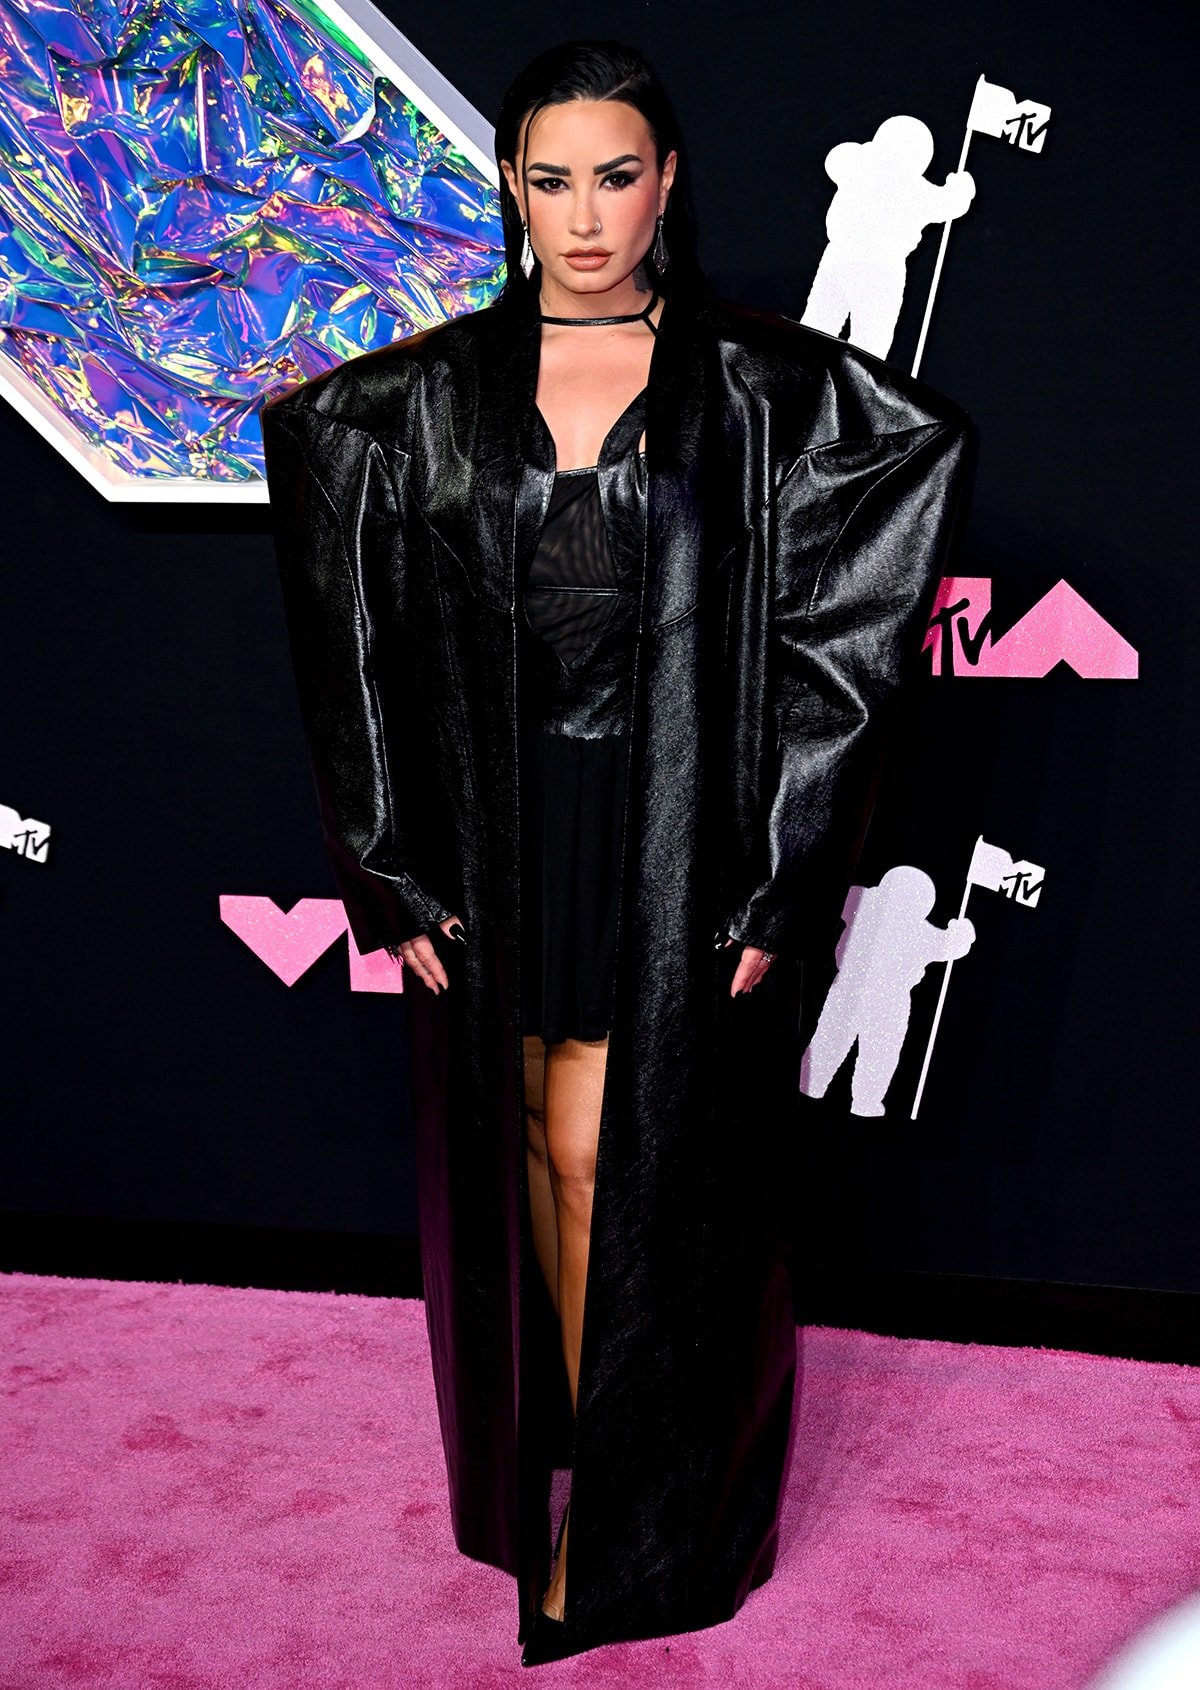 Demi Lovato channels her inner rock goddess in Buerlangma LBD and massive overcoat with structural boxy shoulders